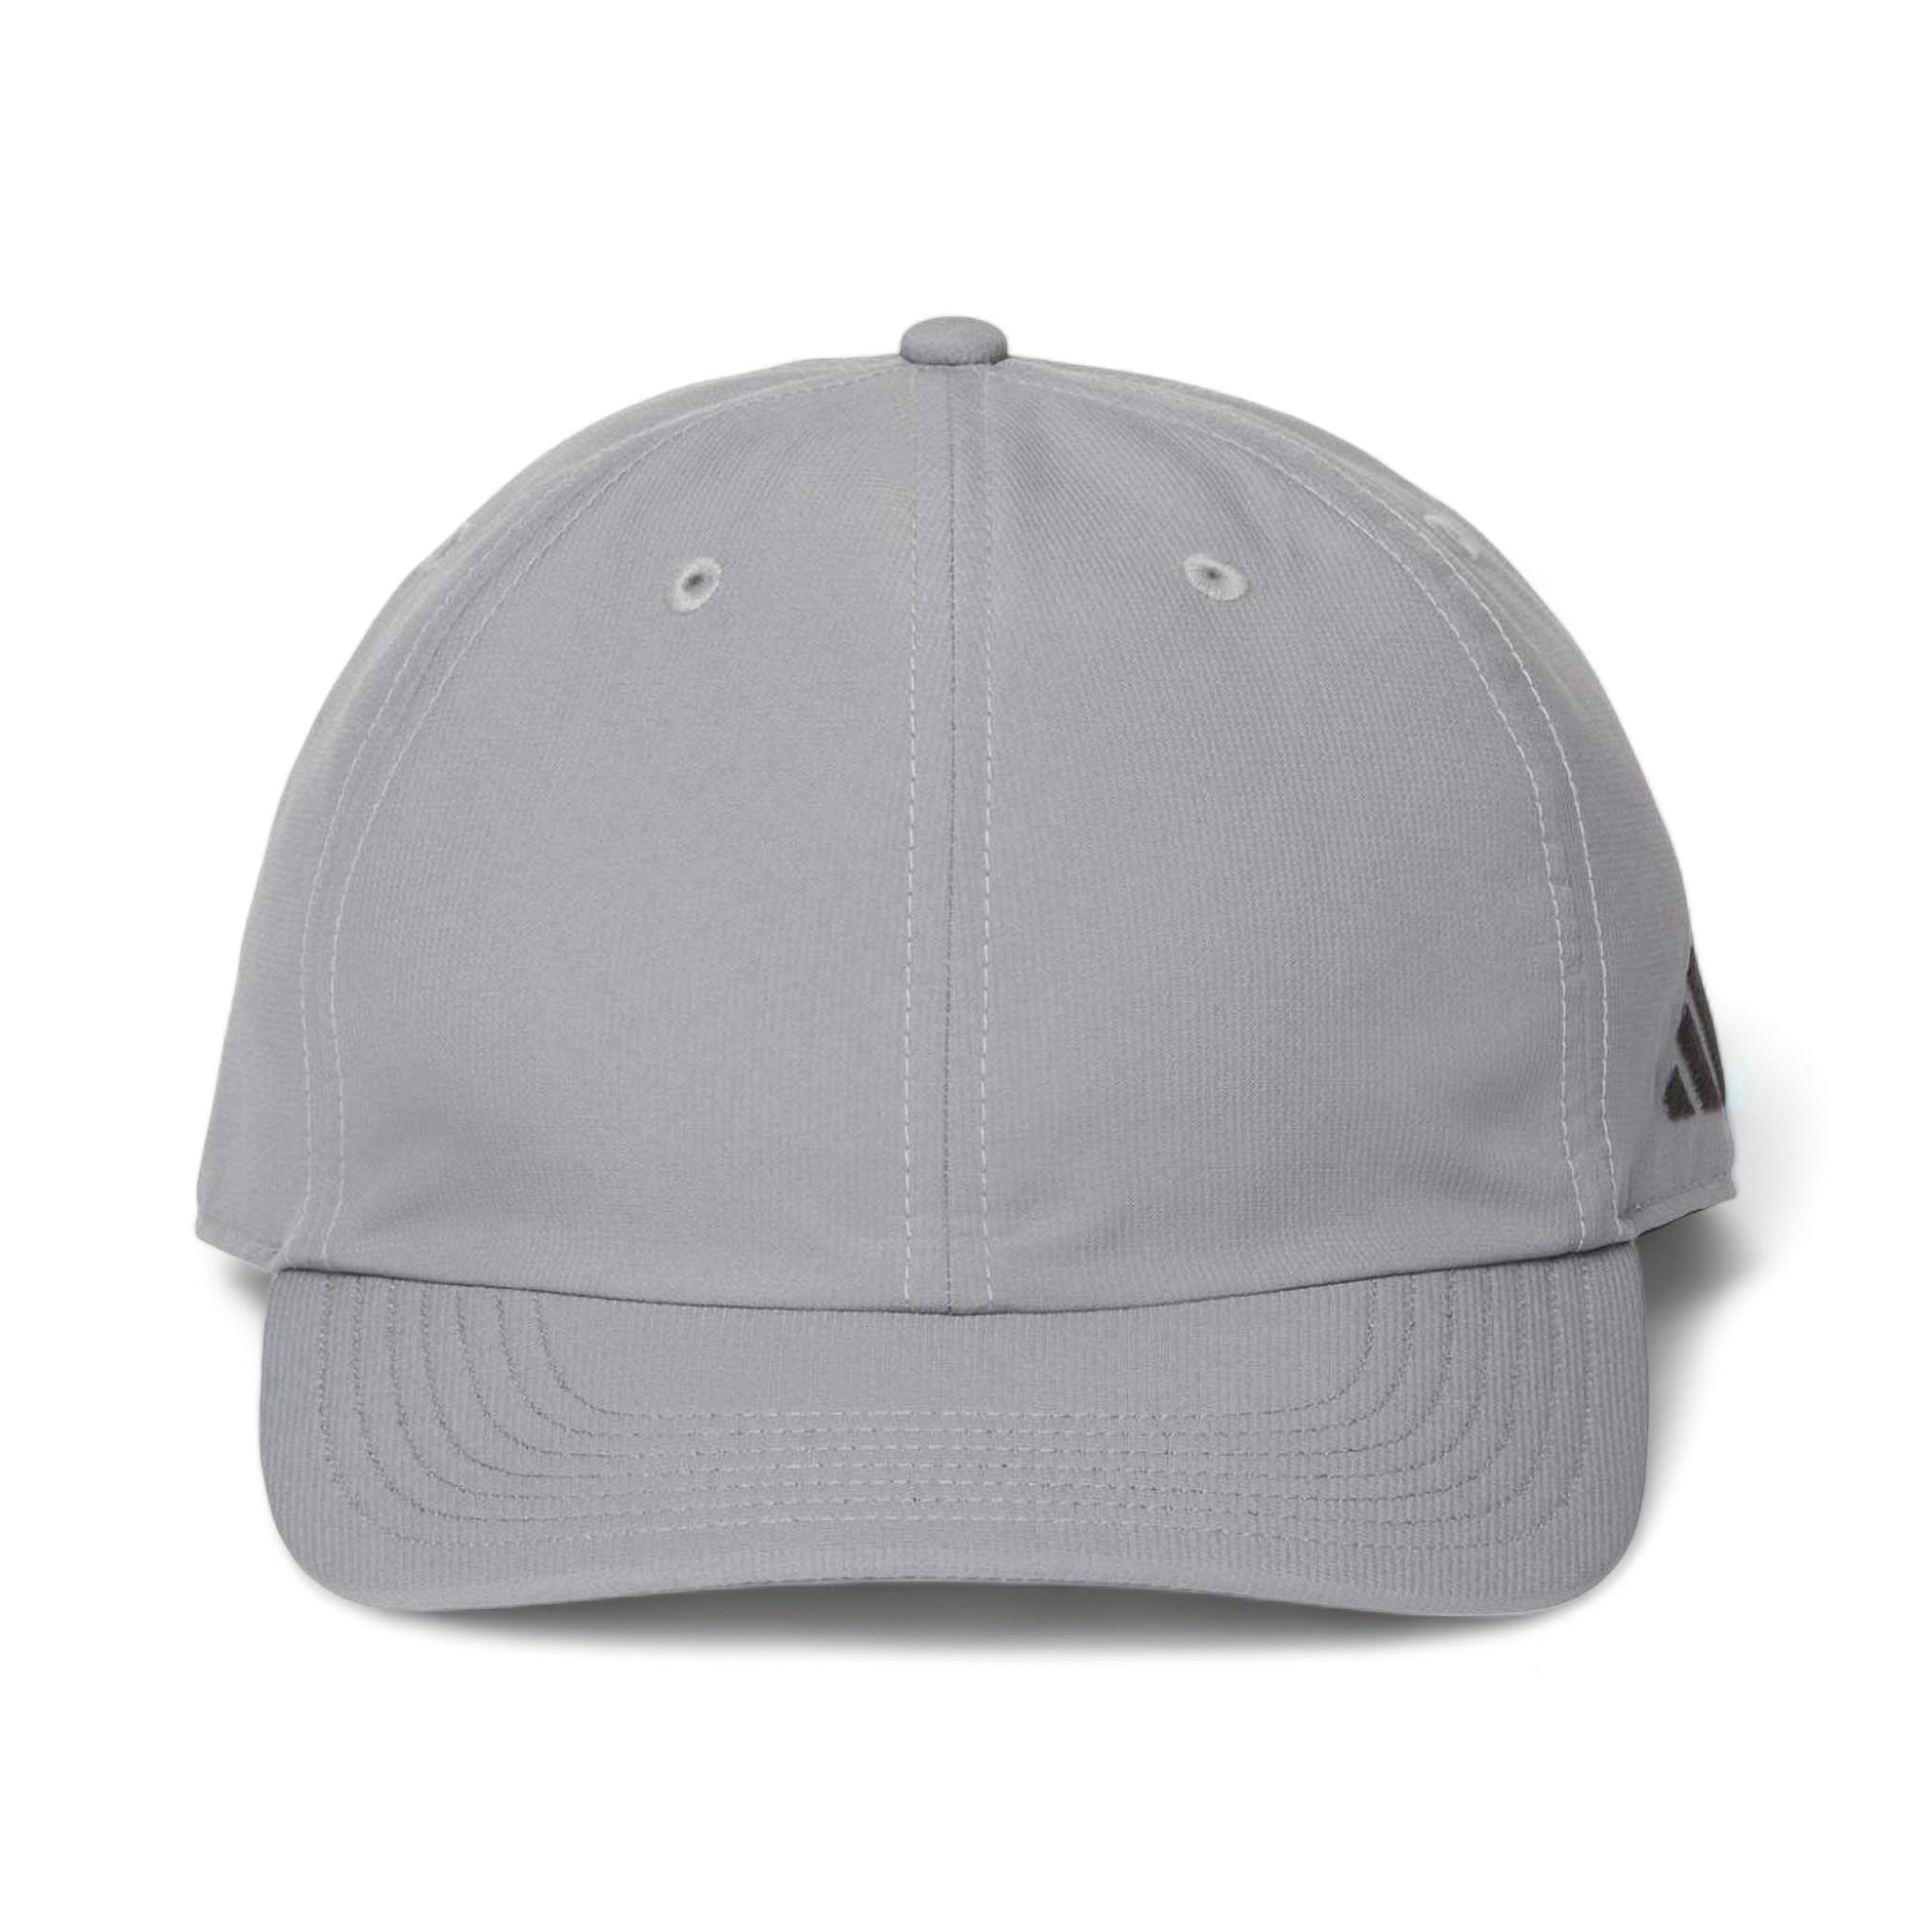 Front view of Adidas A600S custom hat in grey three